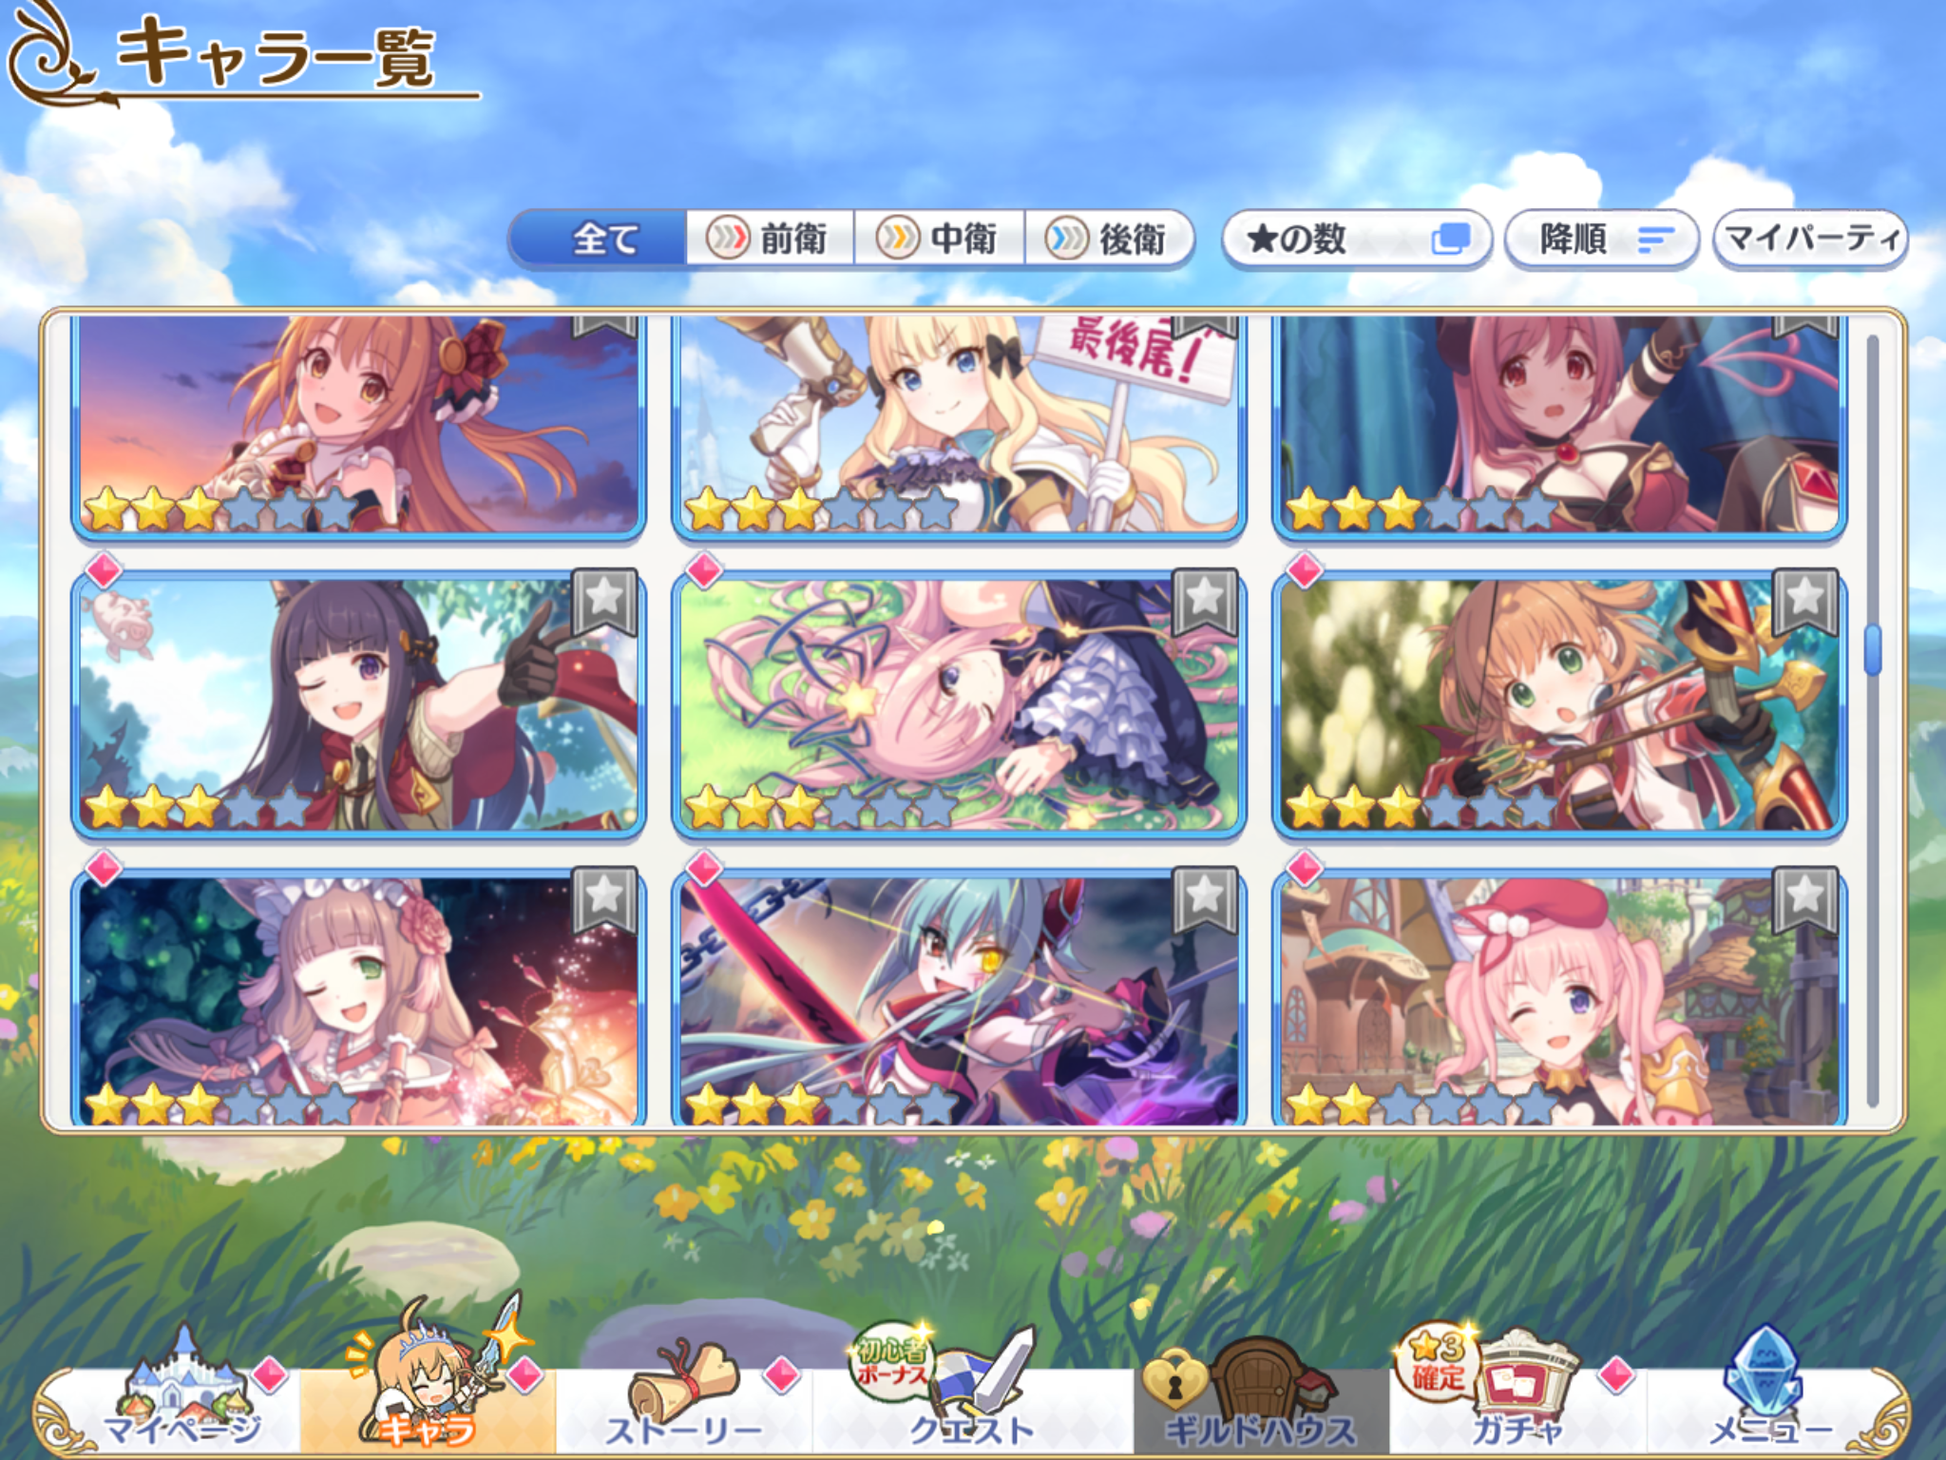 [JP][INSTANT] Priconne 71x3* + 37k Jewels Ames 3Neneka Starter Account Princess Connect Re:Dive-Mobile Games Starter